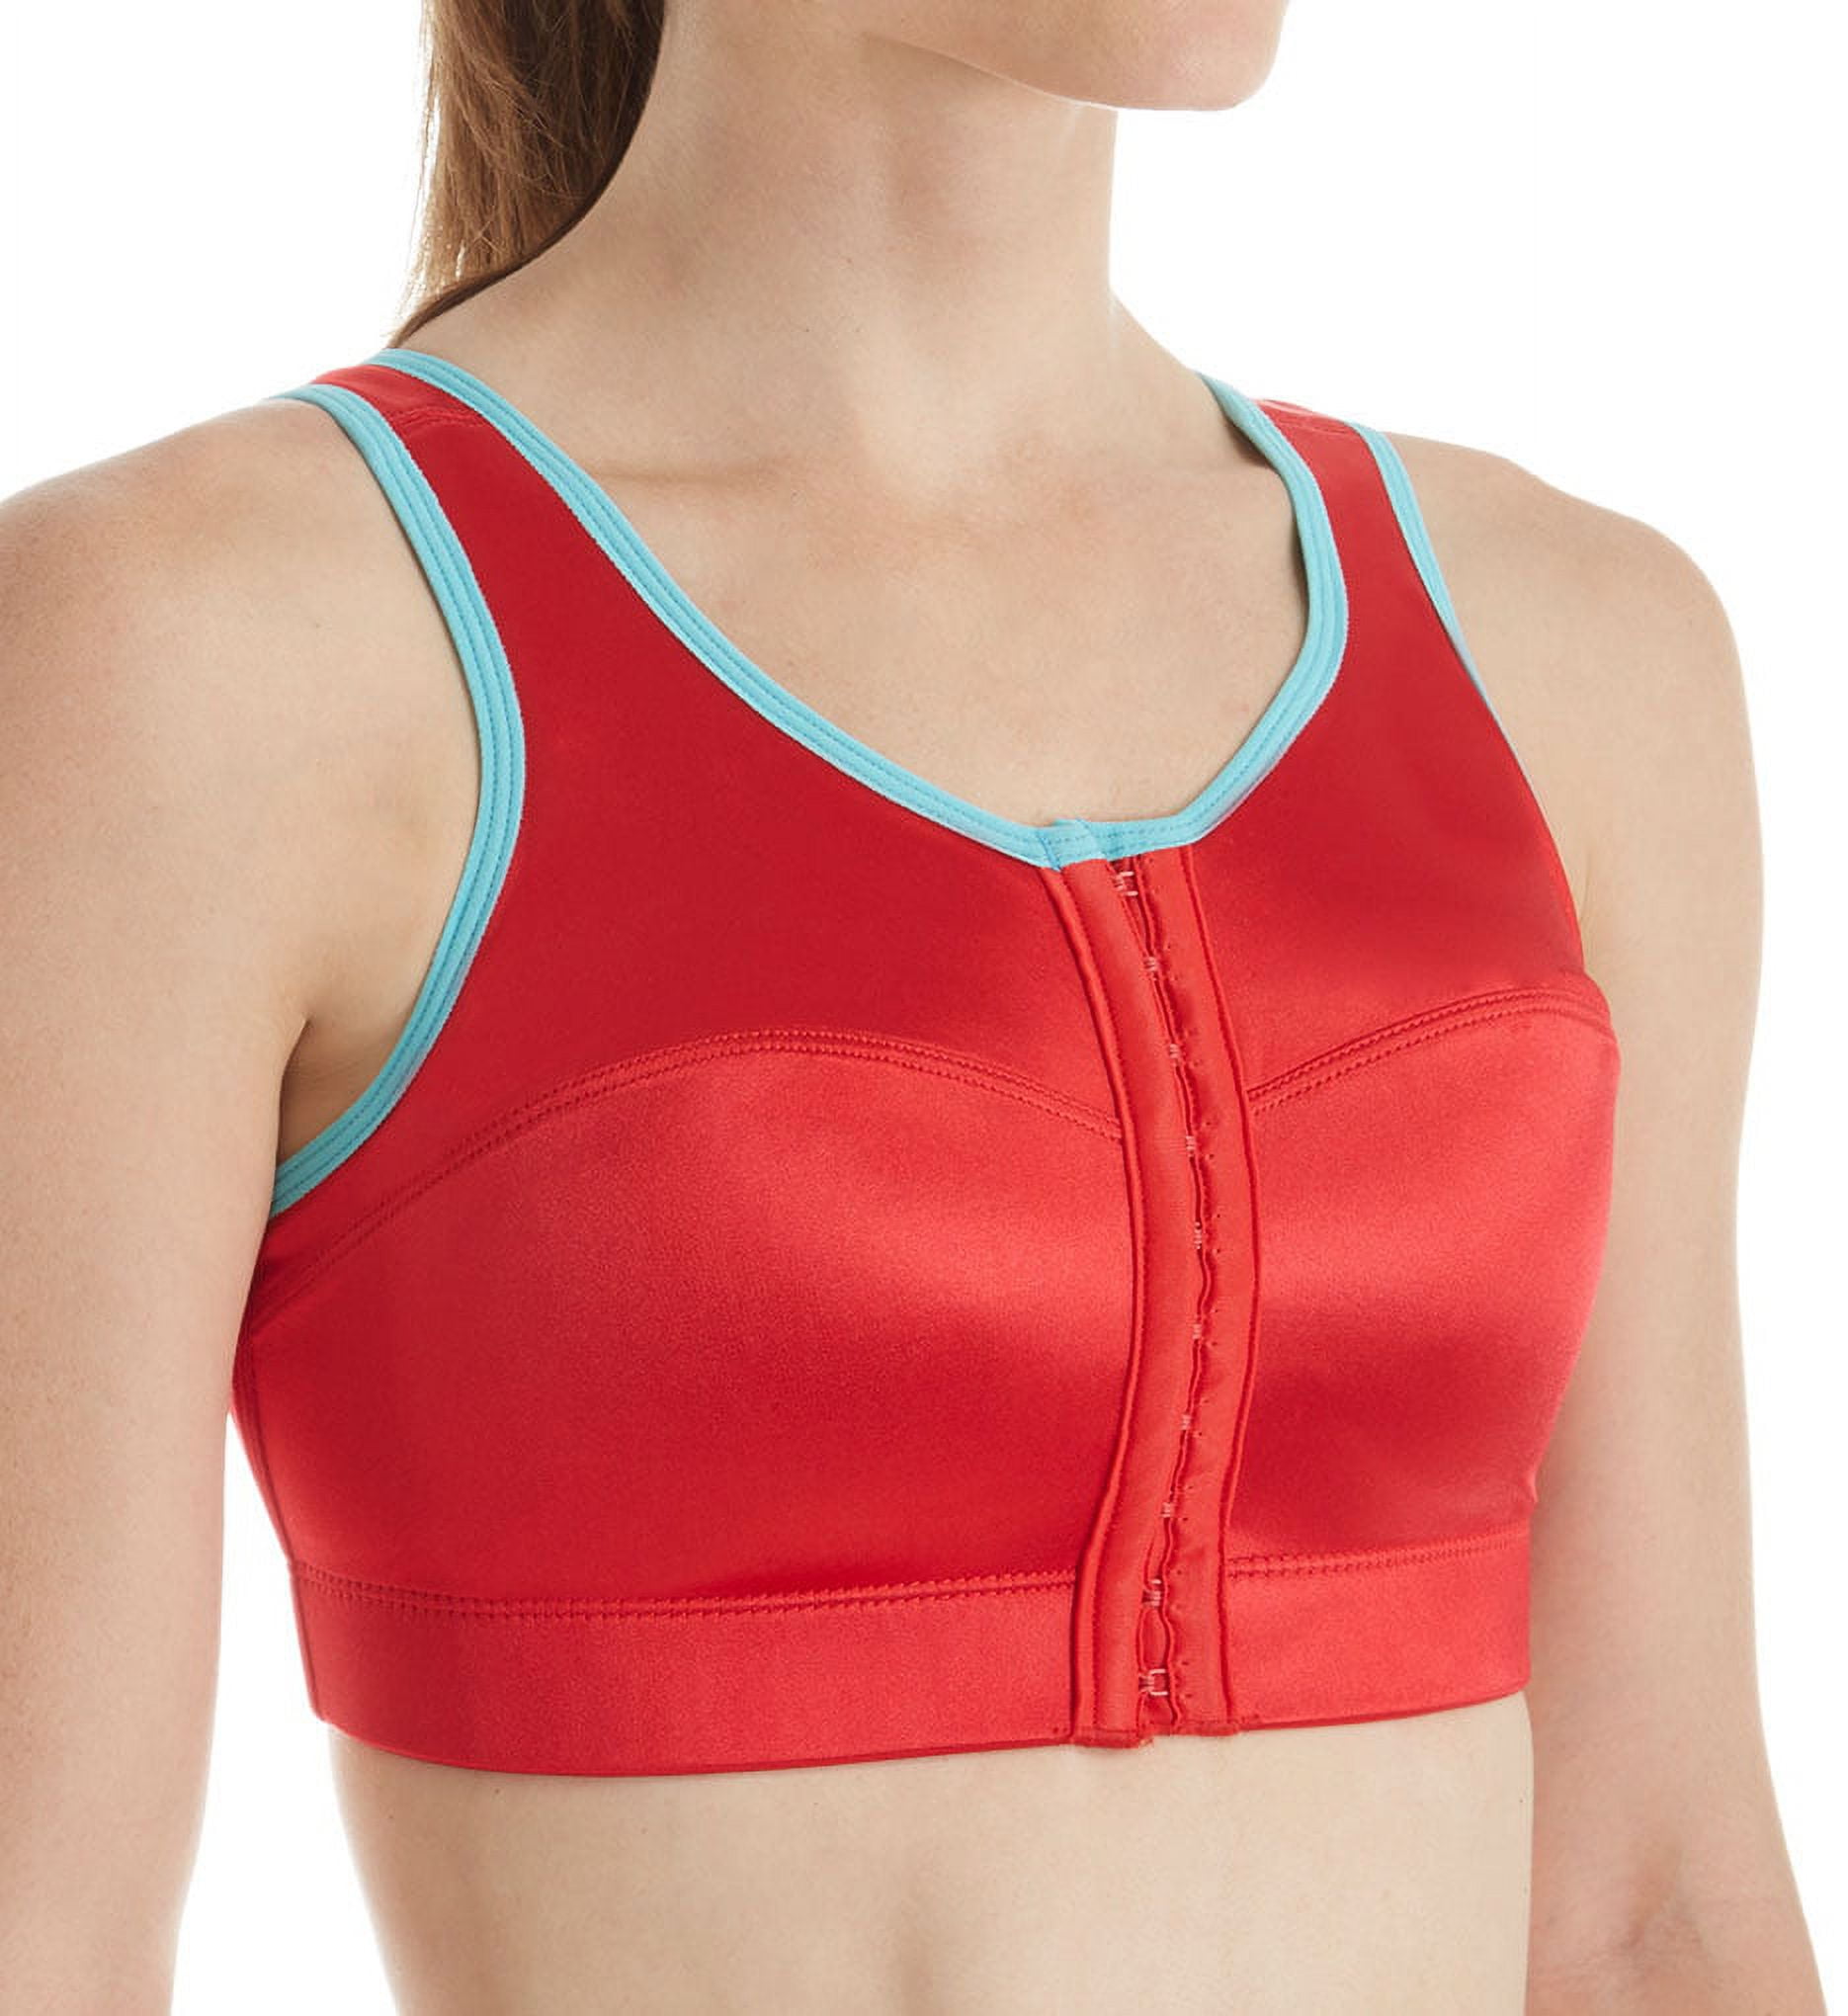 ENELL SPORT High Impact Bra – Enell